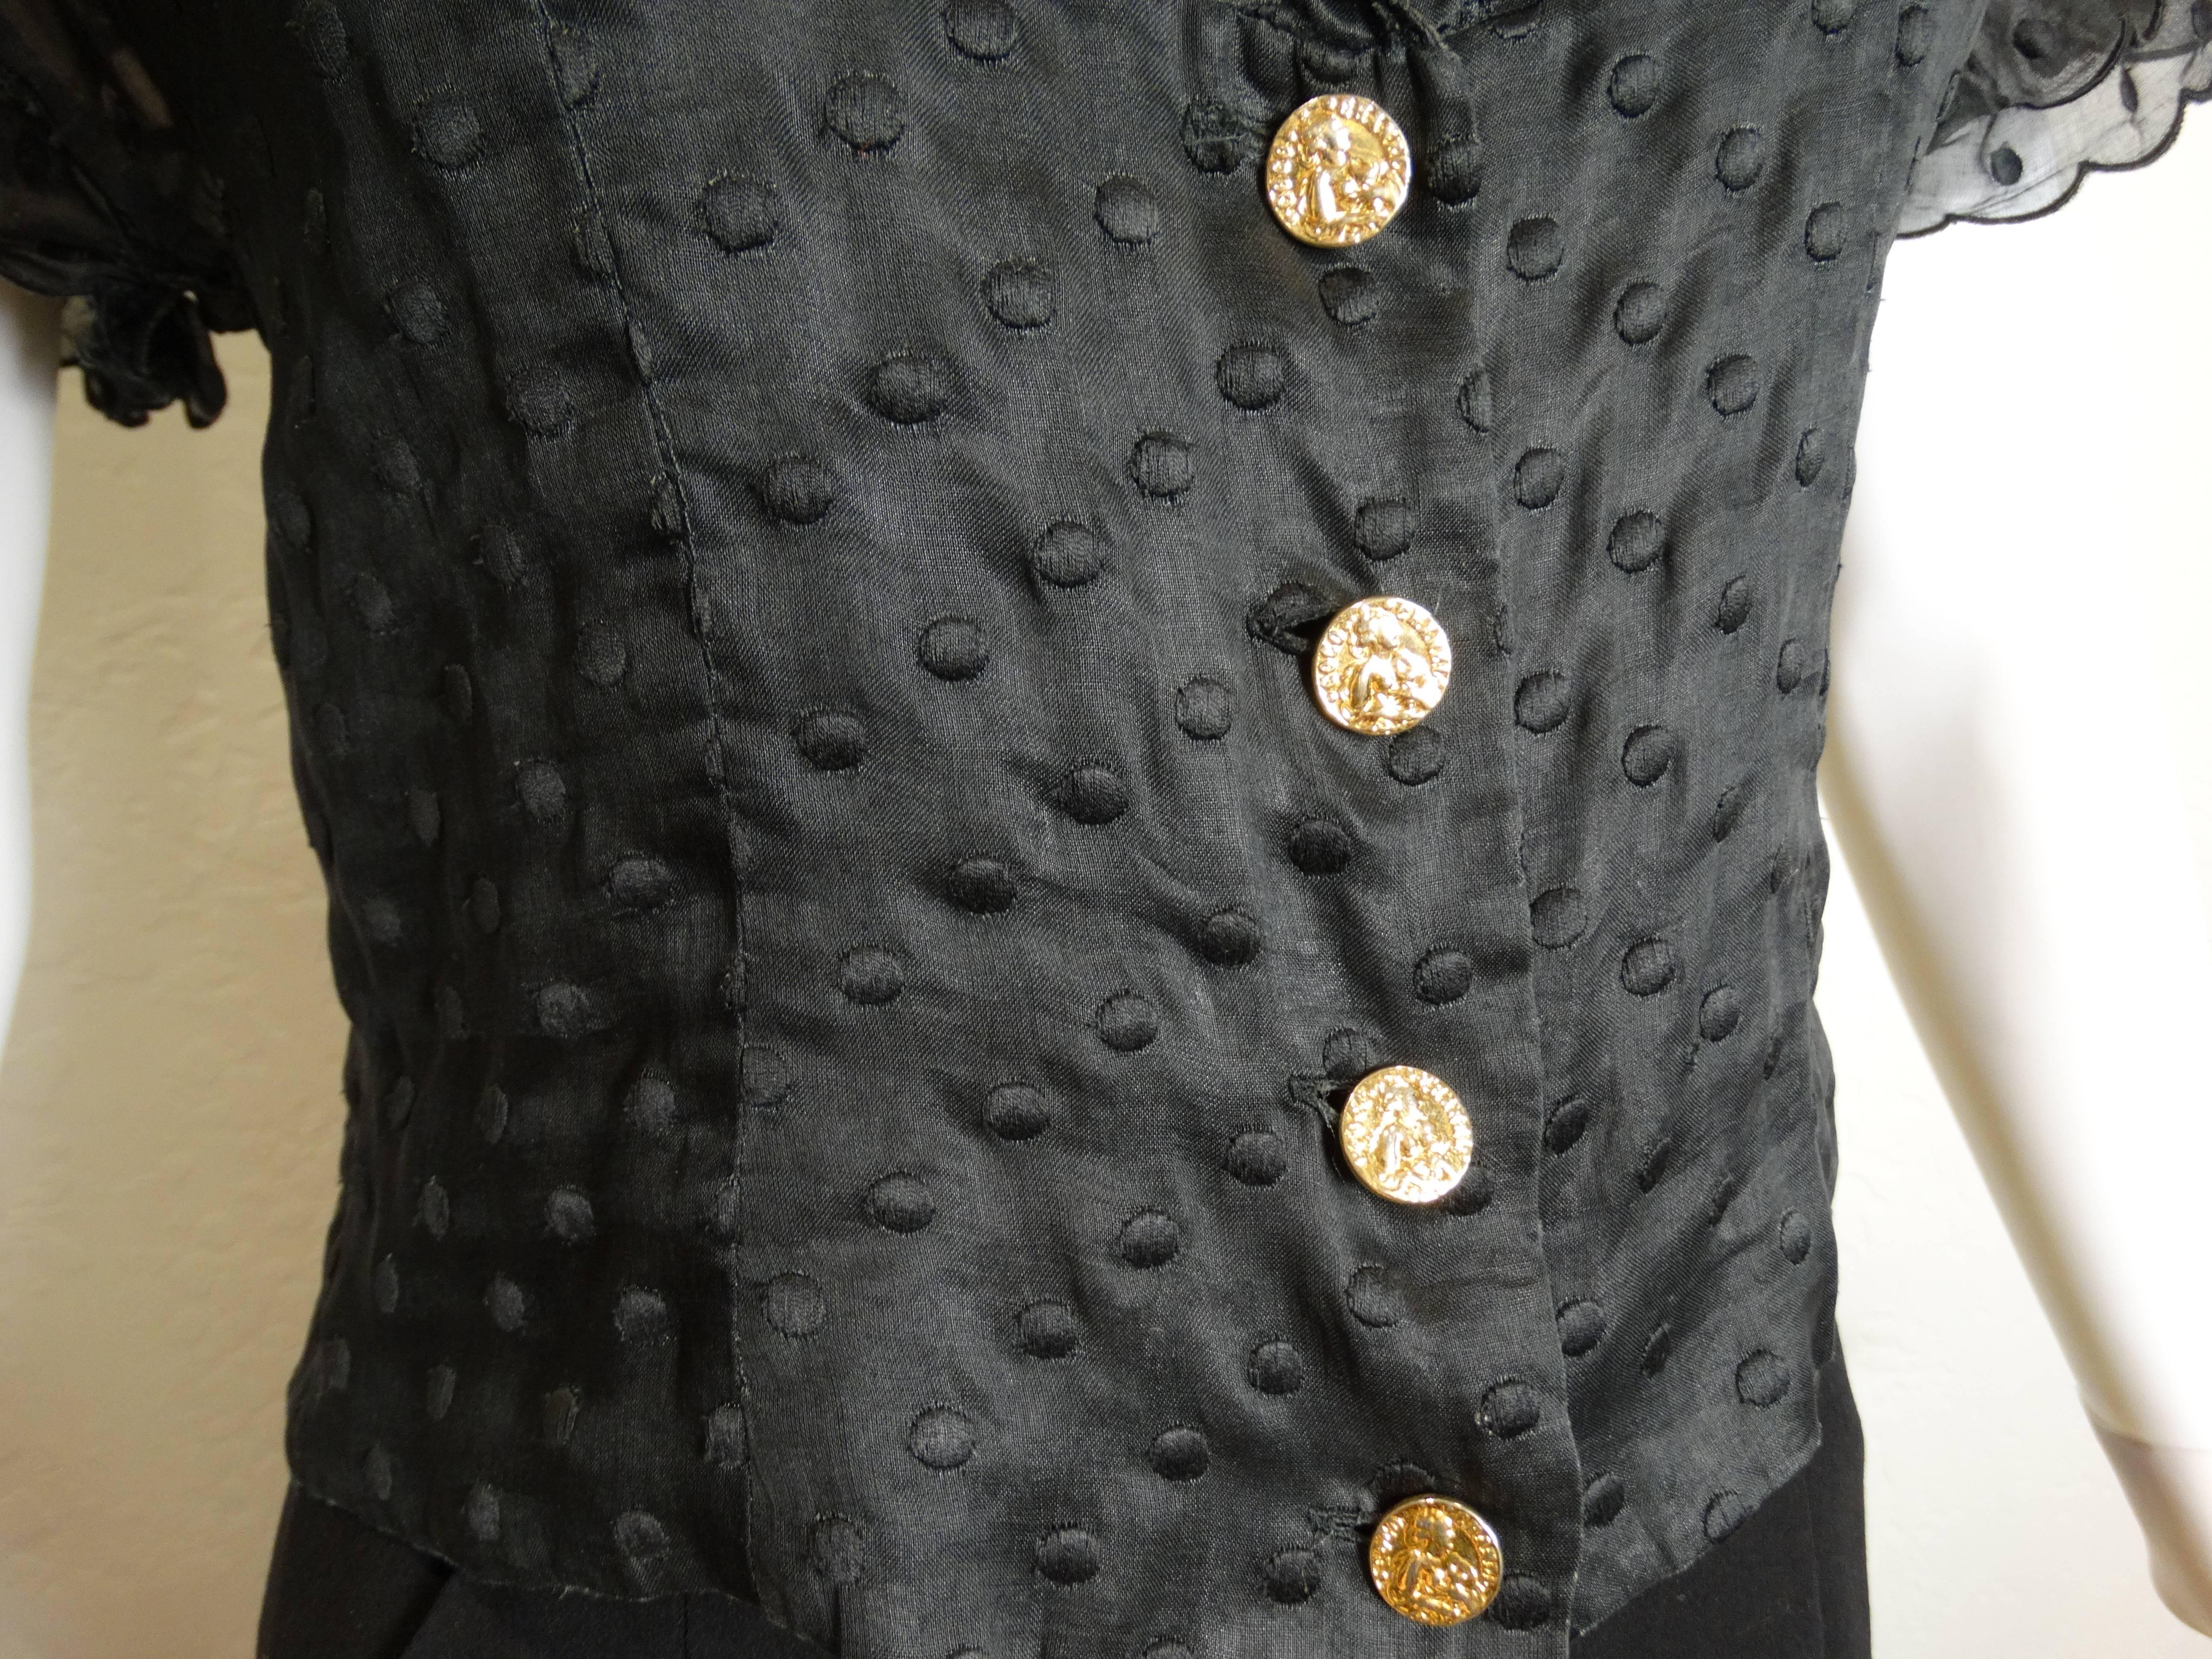 Black 1980s Mademoiselle Coco Chanel Blouse